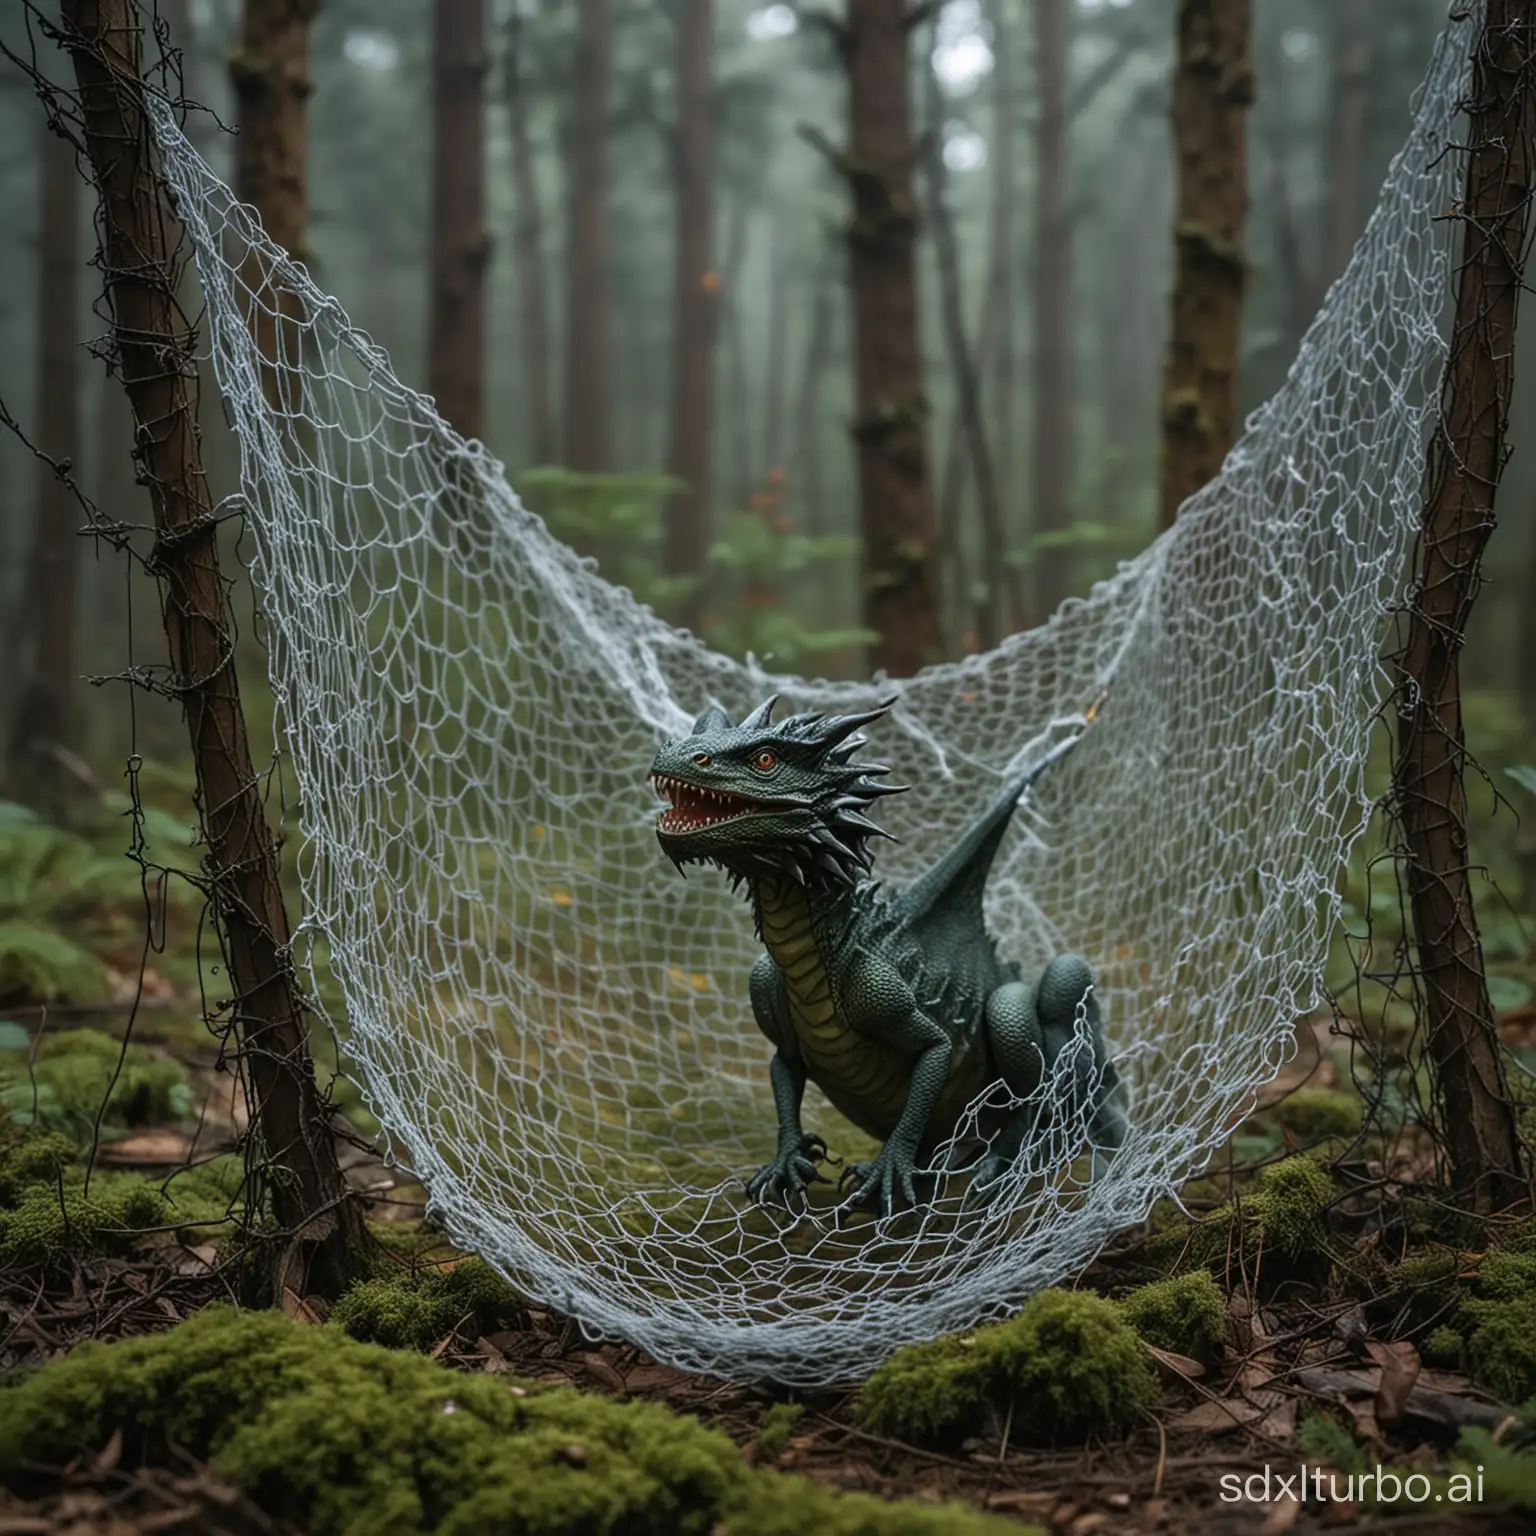 forest, there is a tiny dragon, wounded and trapped in a net.